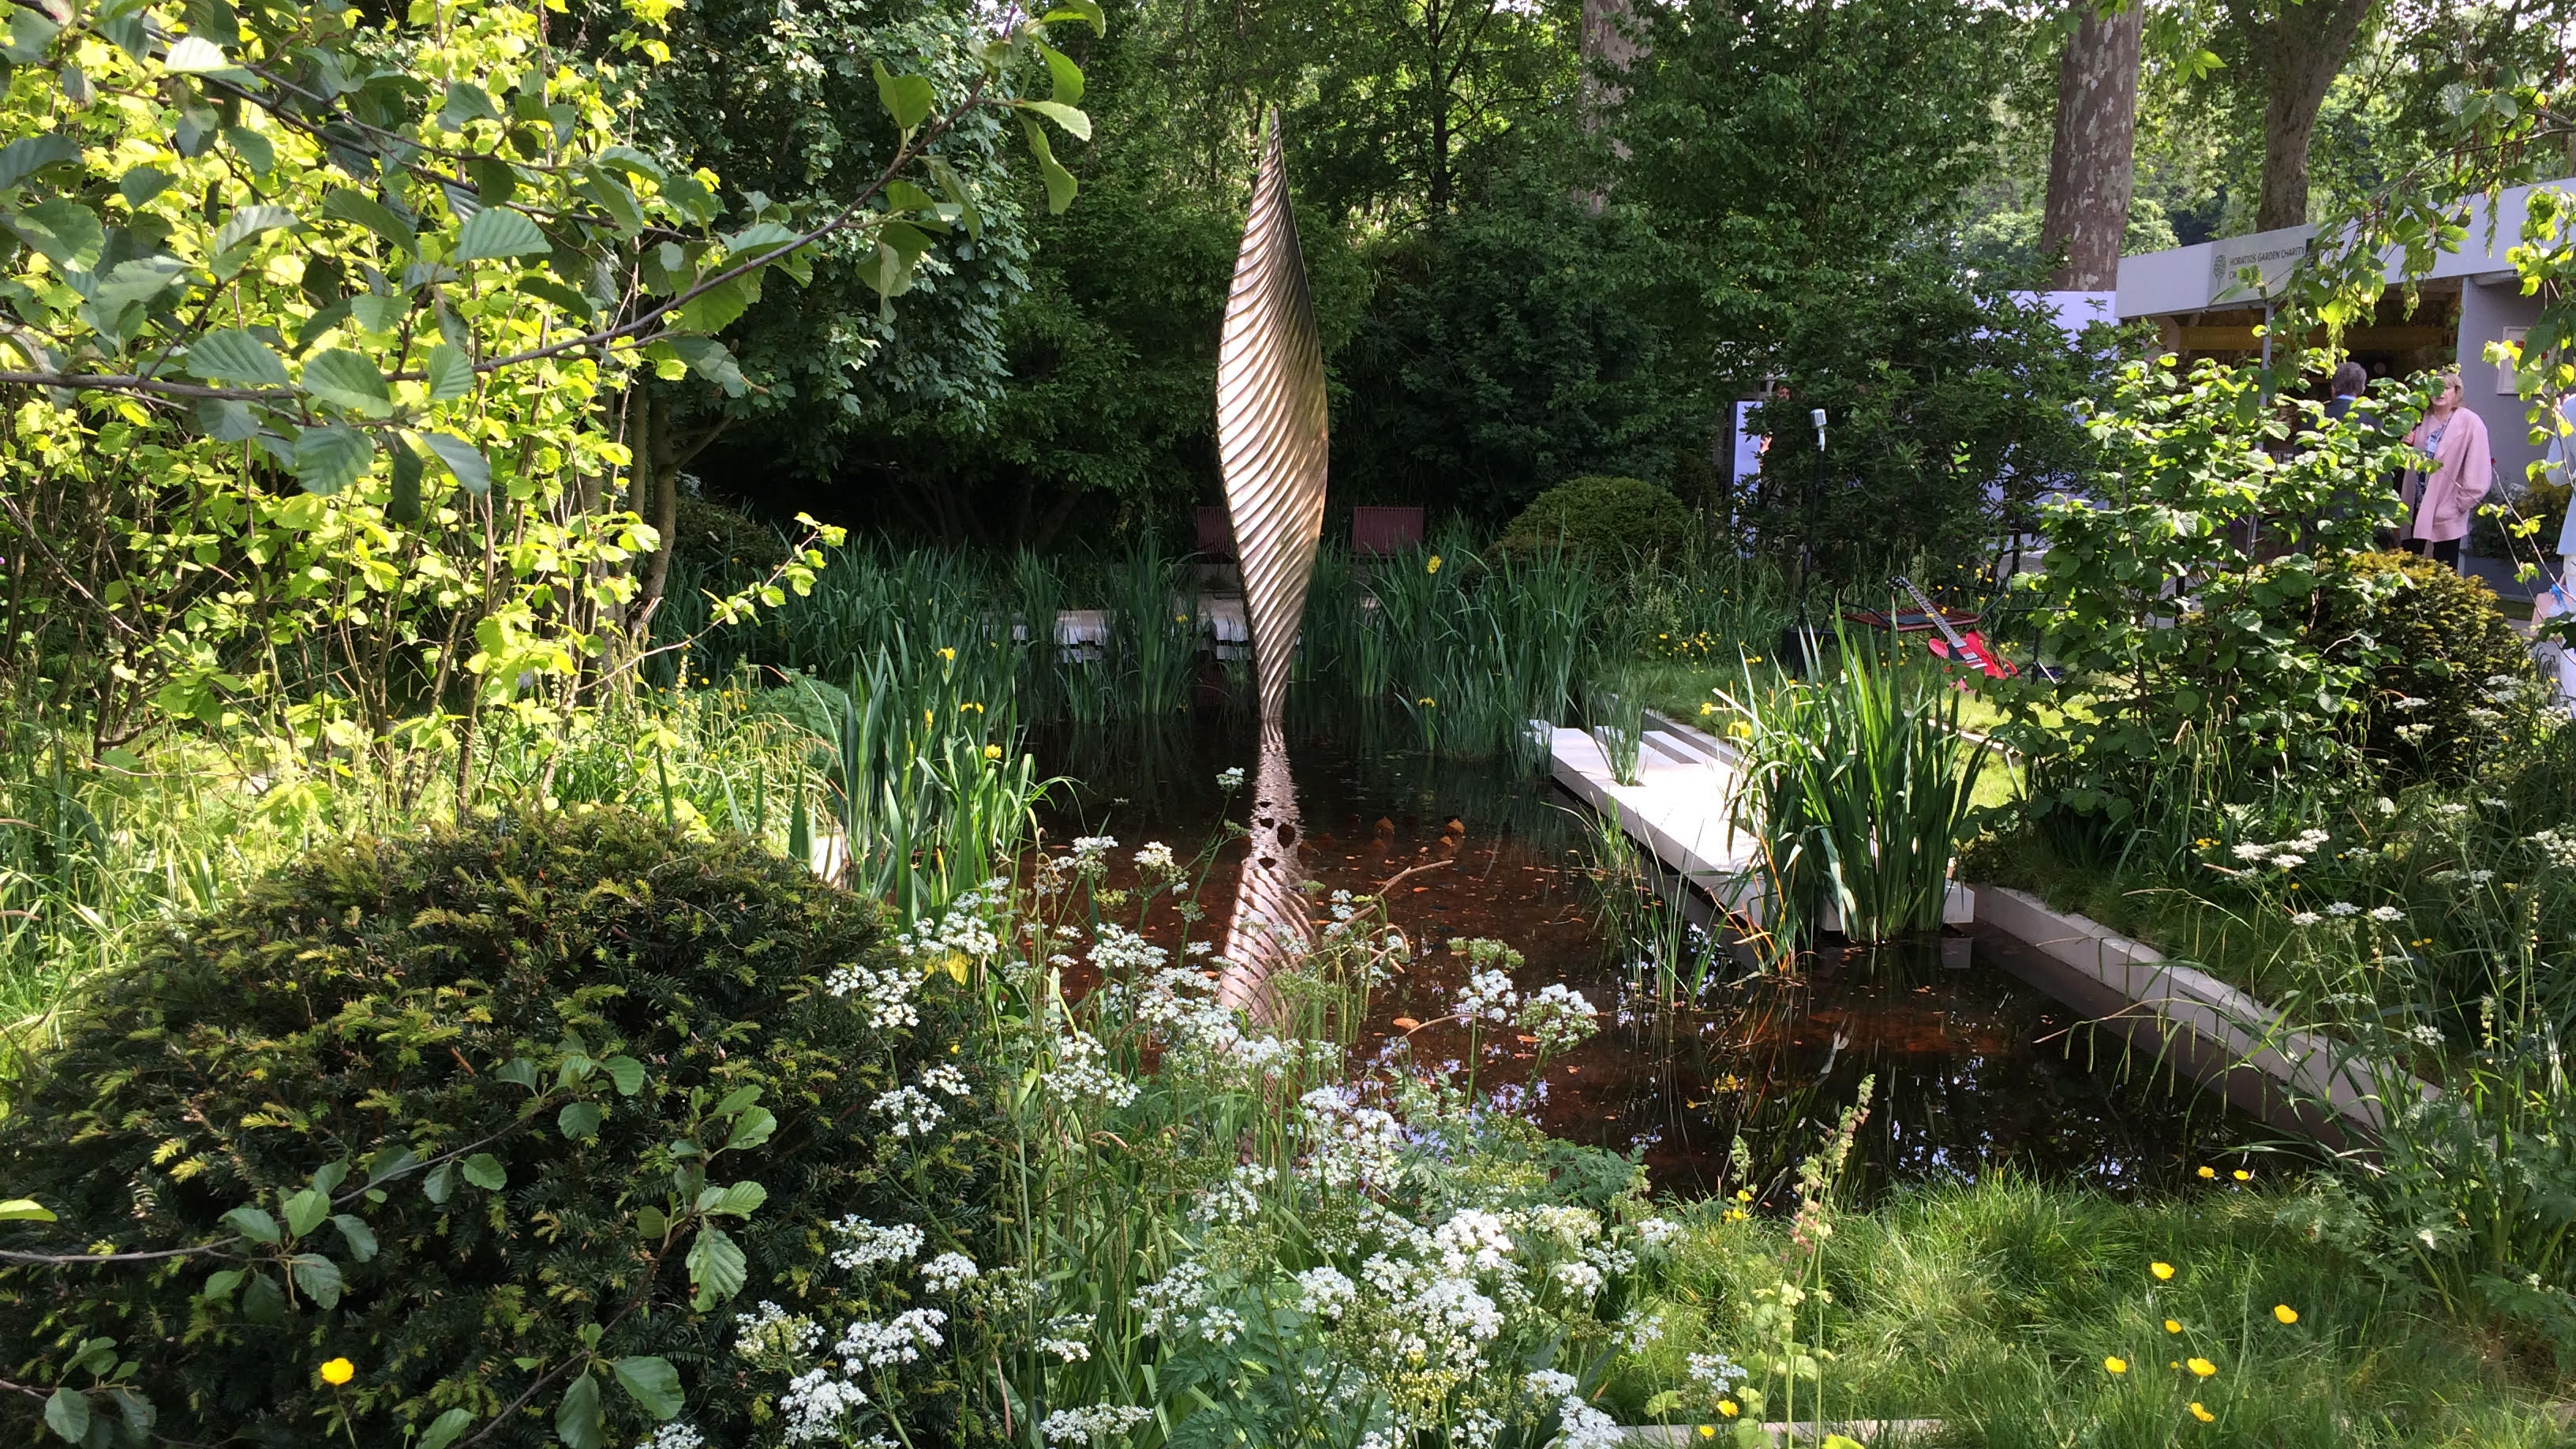 chelsea flower show 2019 highlights the importance of sustainable